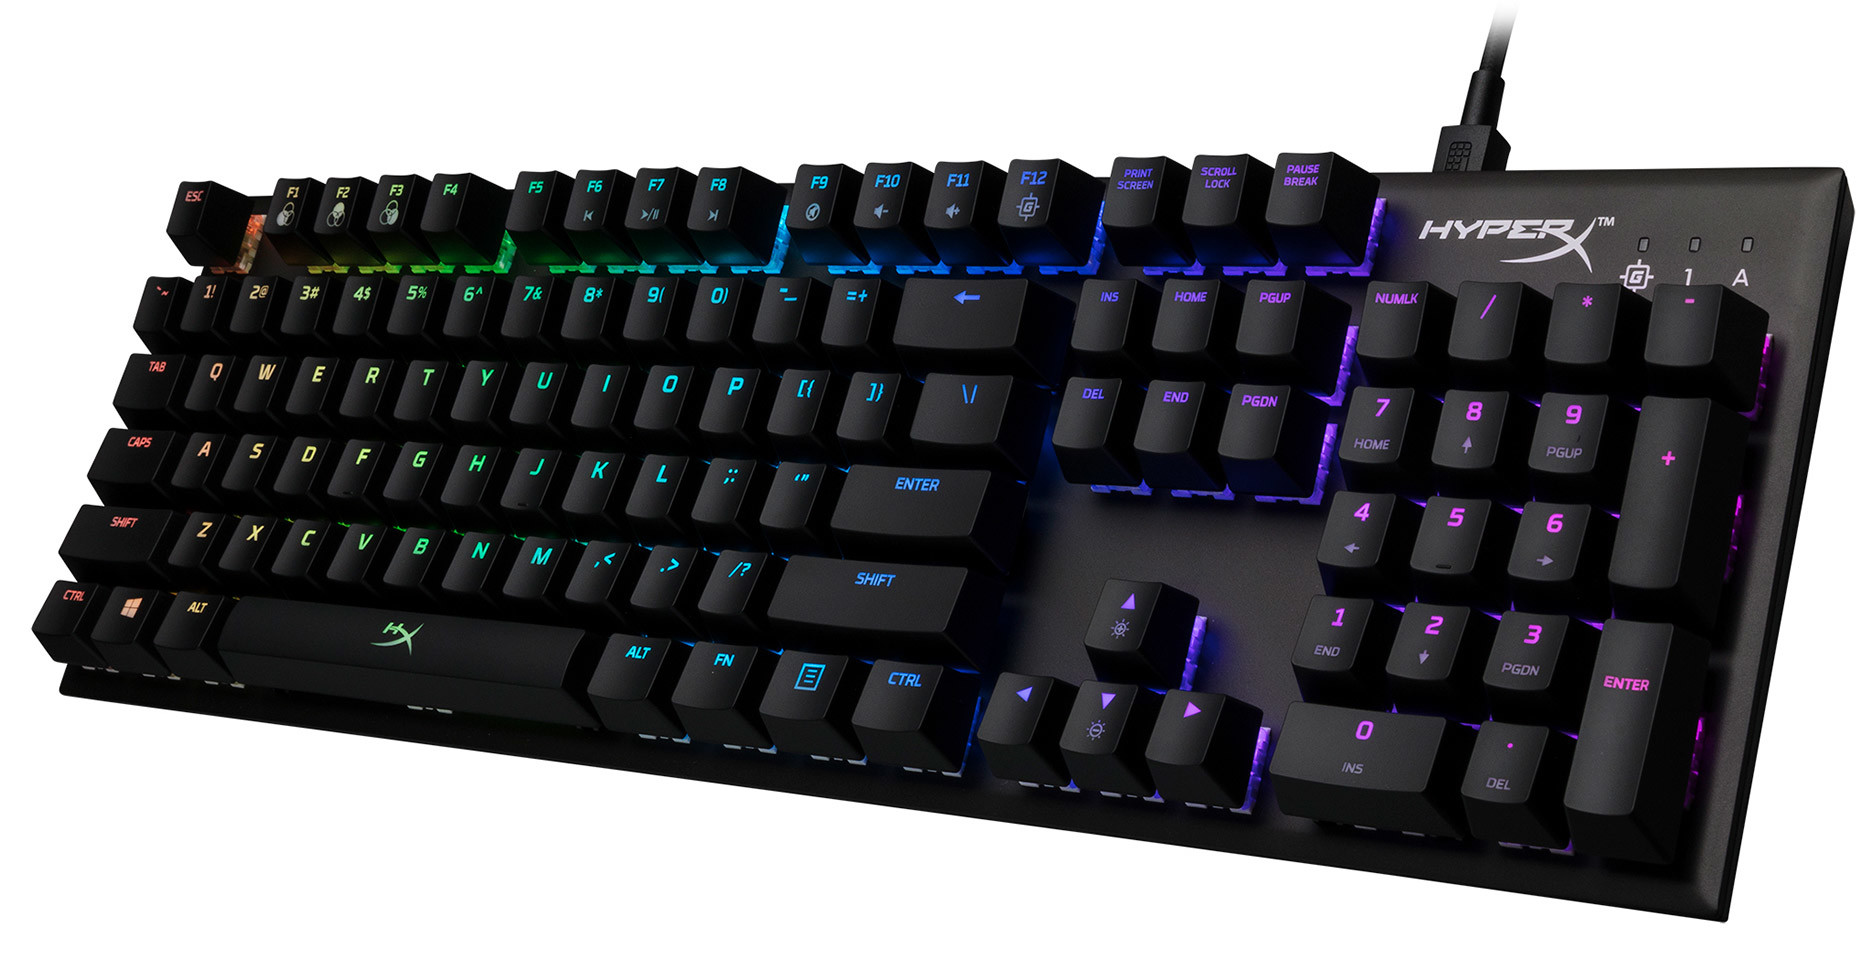 HyperX Announces RGB Keyboard with Kailh Silver Switches | TechPowerUp